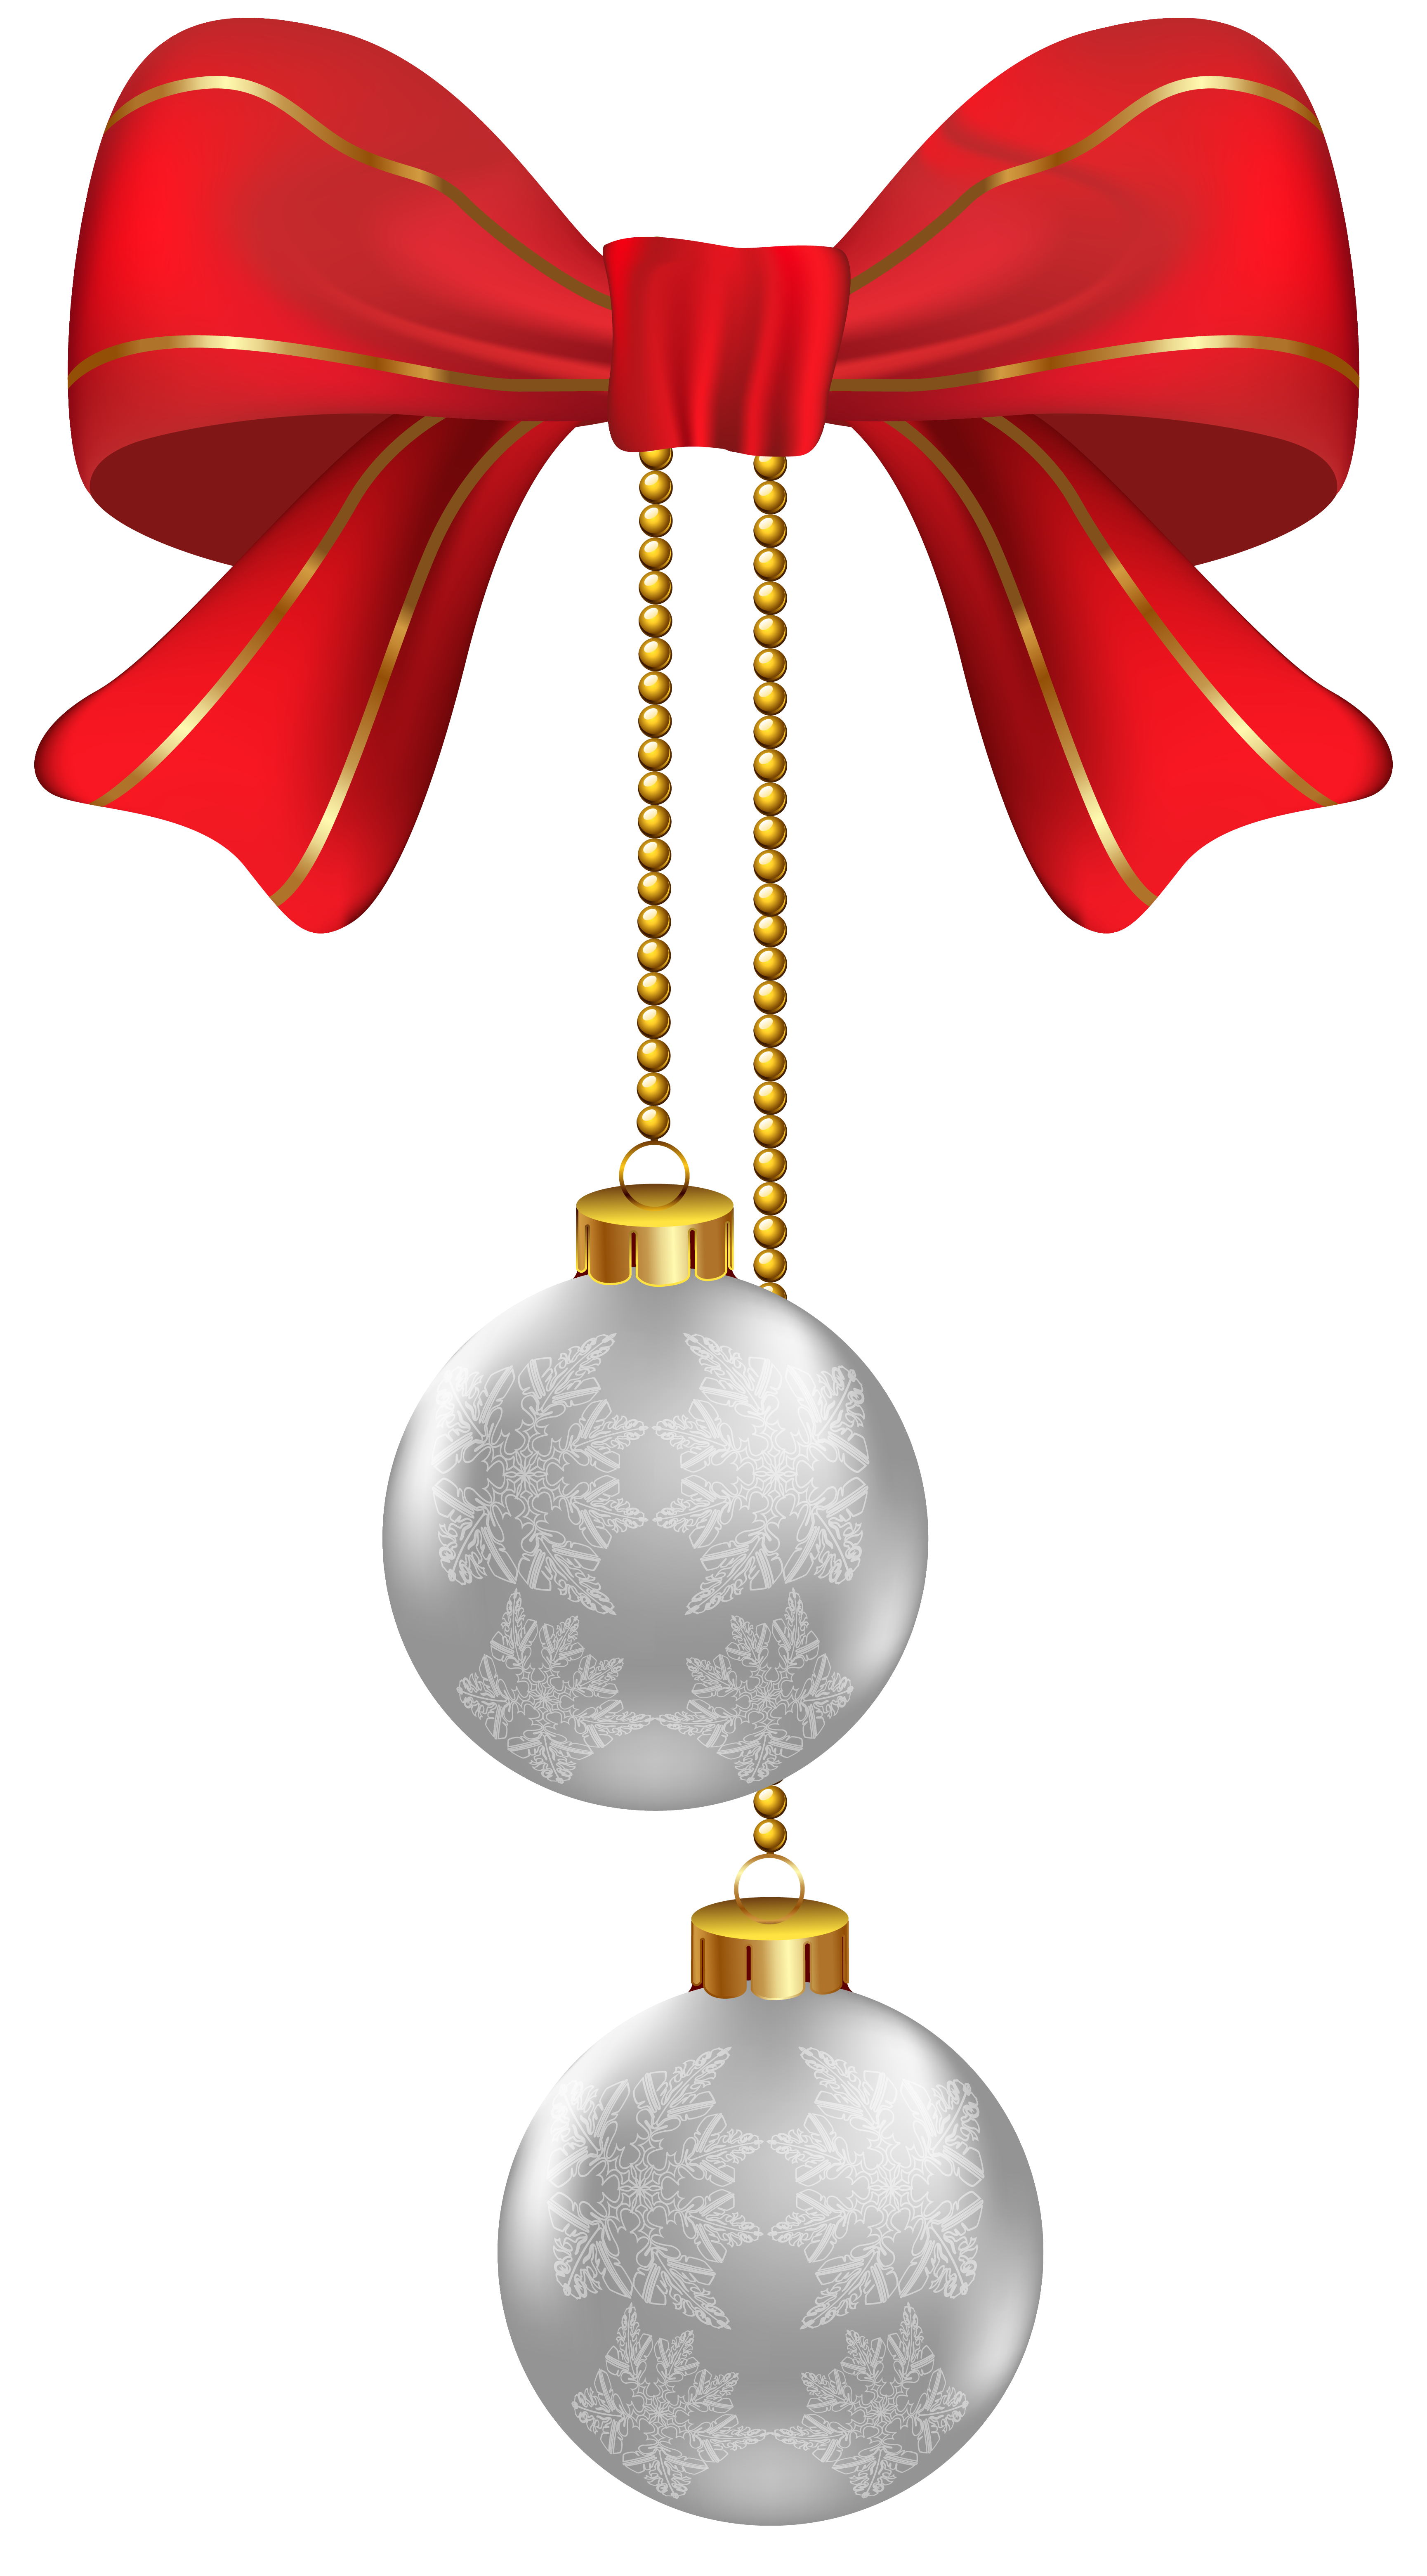 Hanging christmas silver ornaments. Latte clipart peppermint